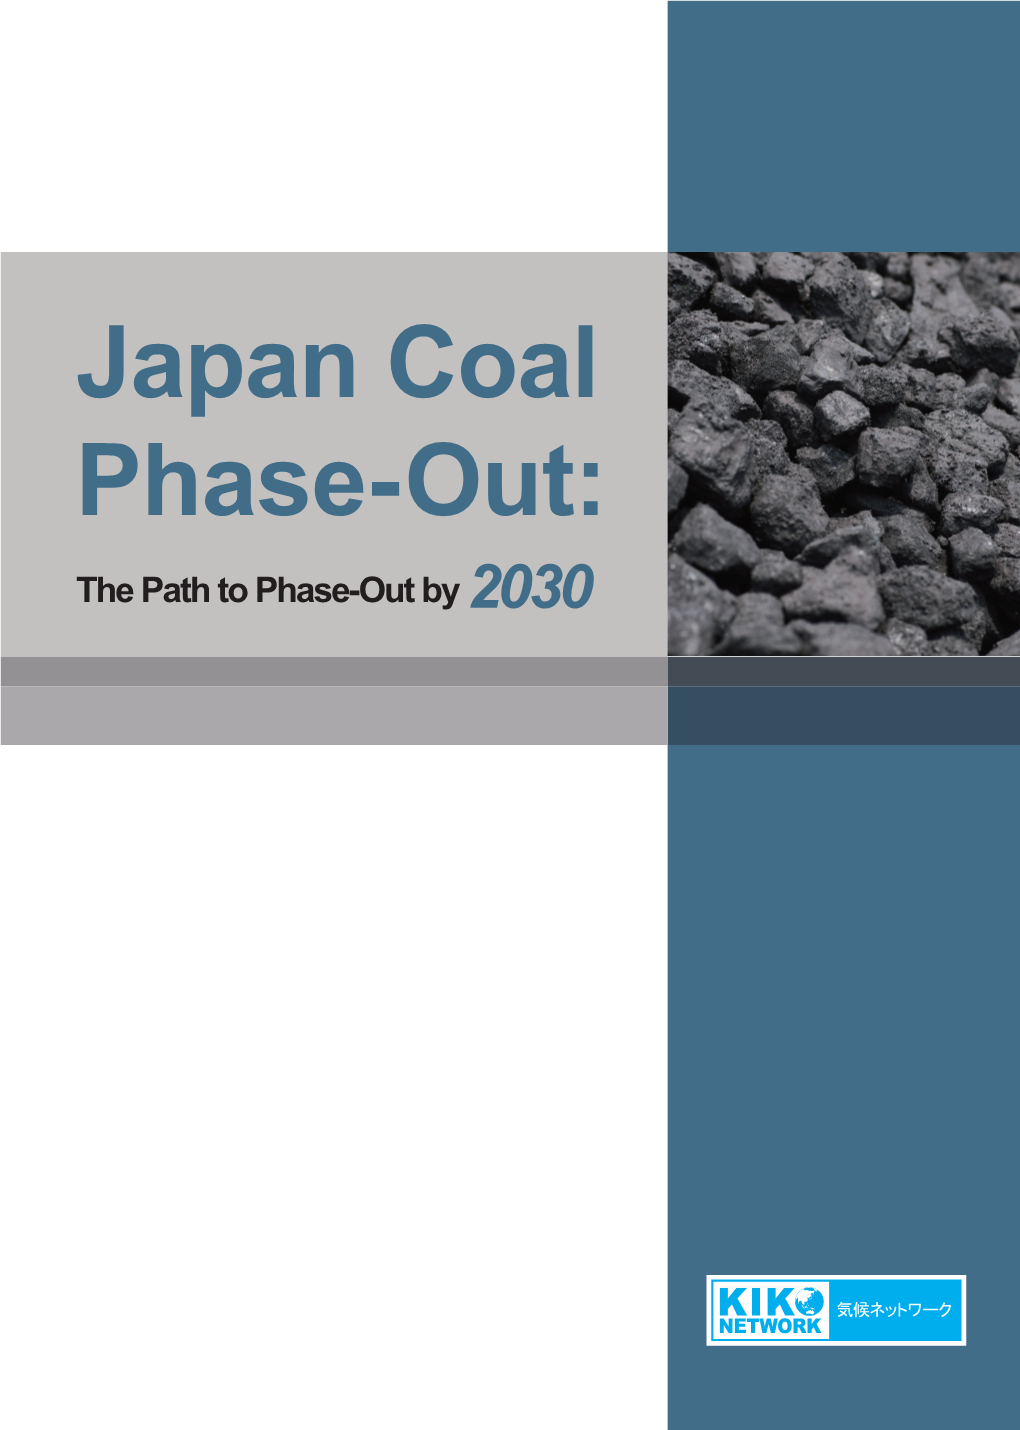 Japan Coal Phase-Out: the Path to Phase-Out by 2030 Summary: Japan Should Completely Phase out Coal by 2030